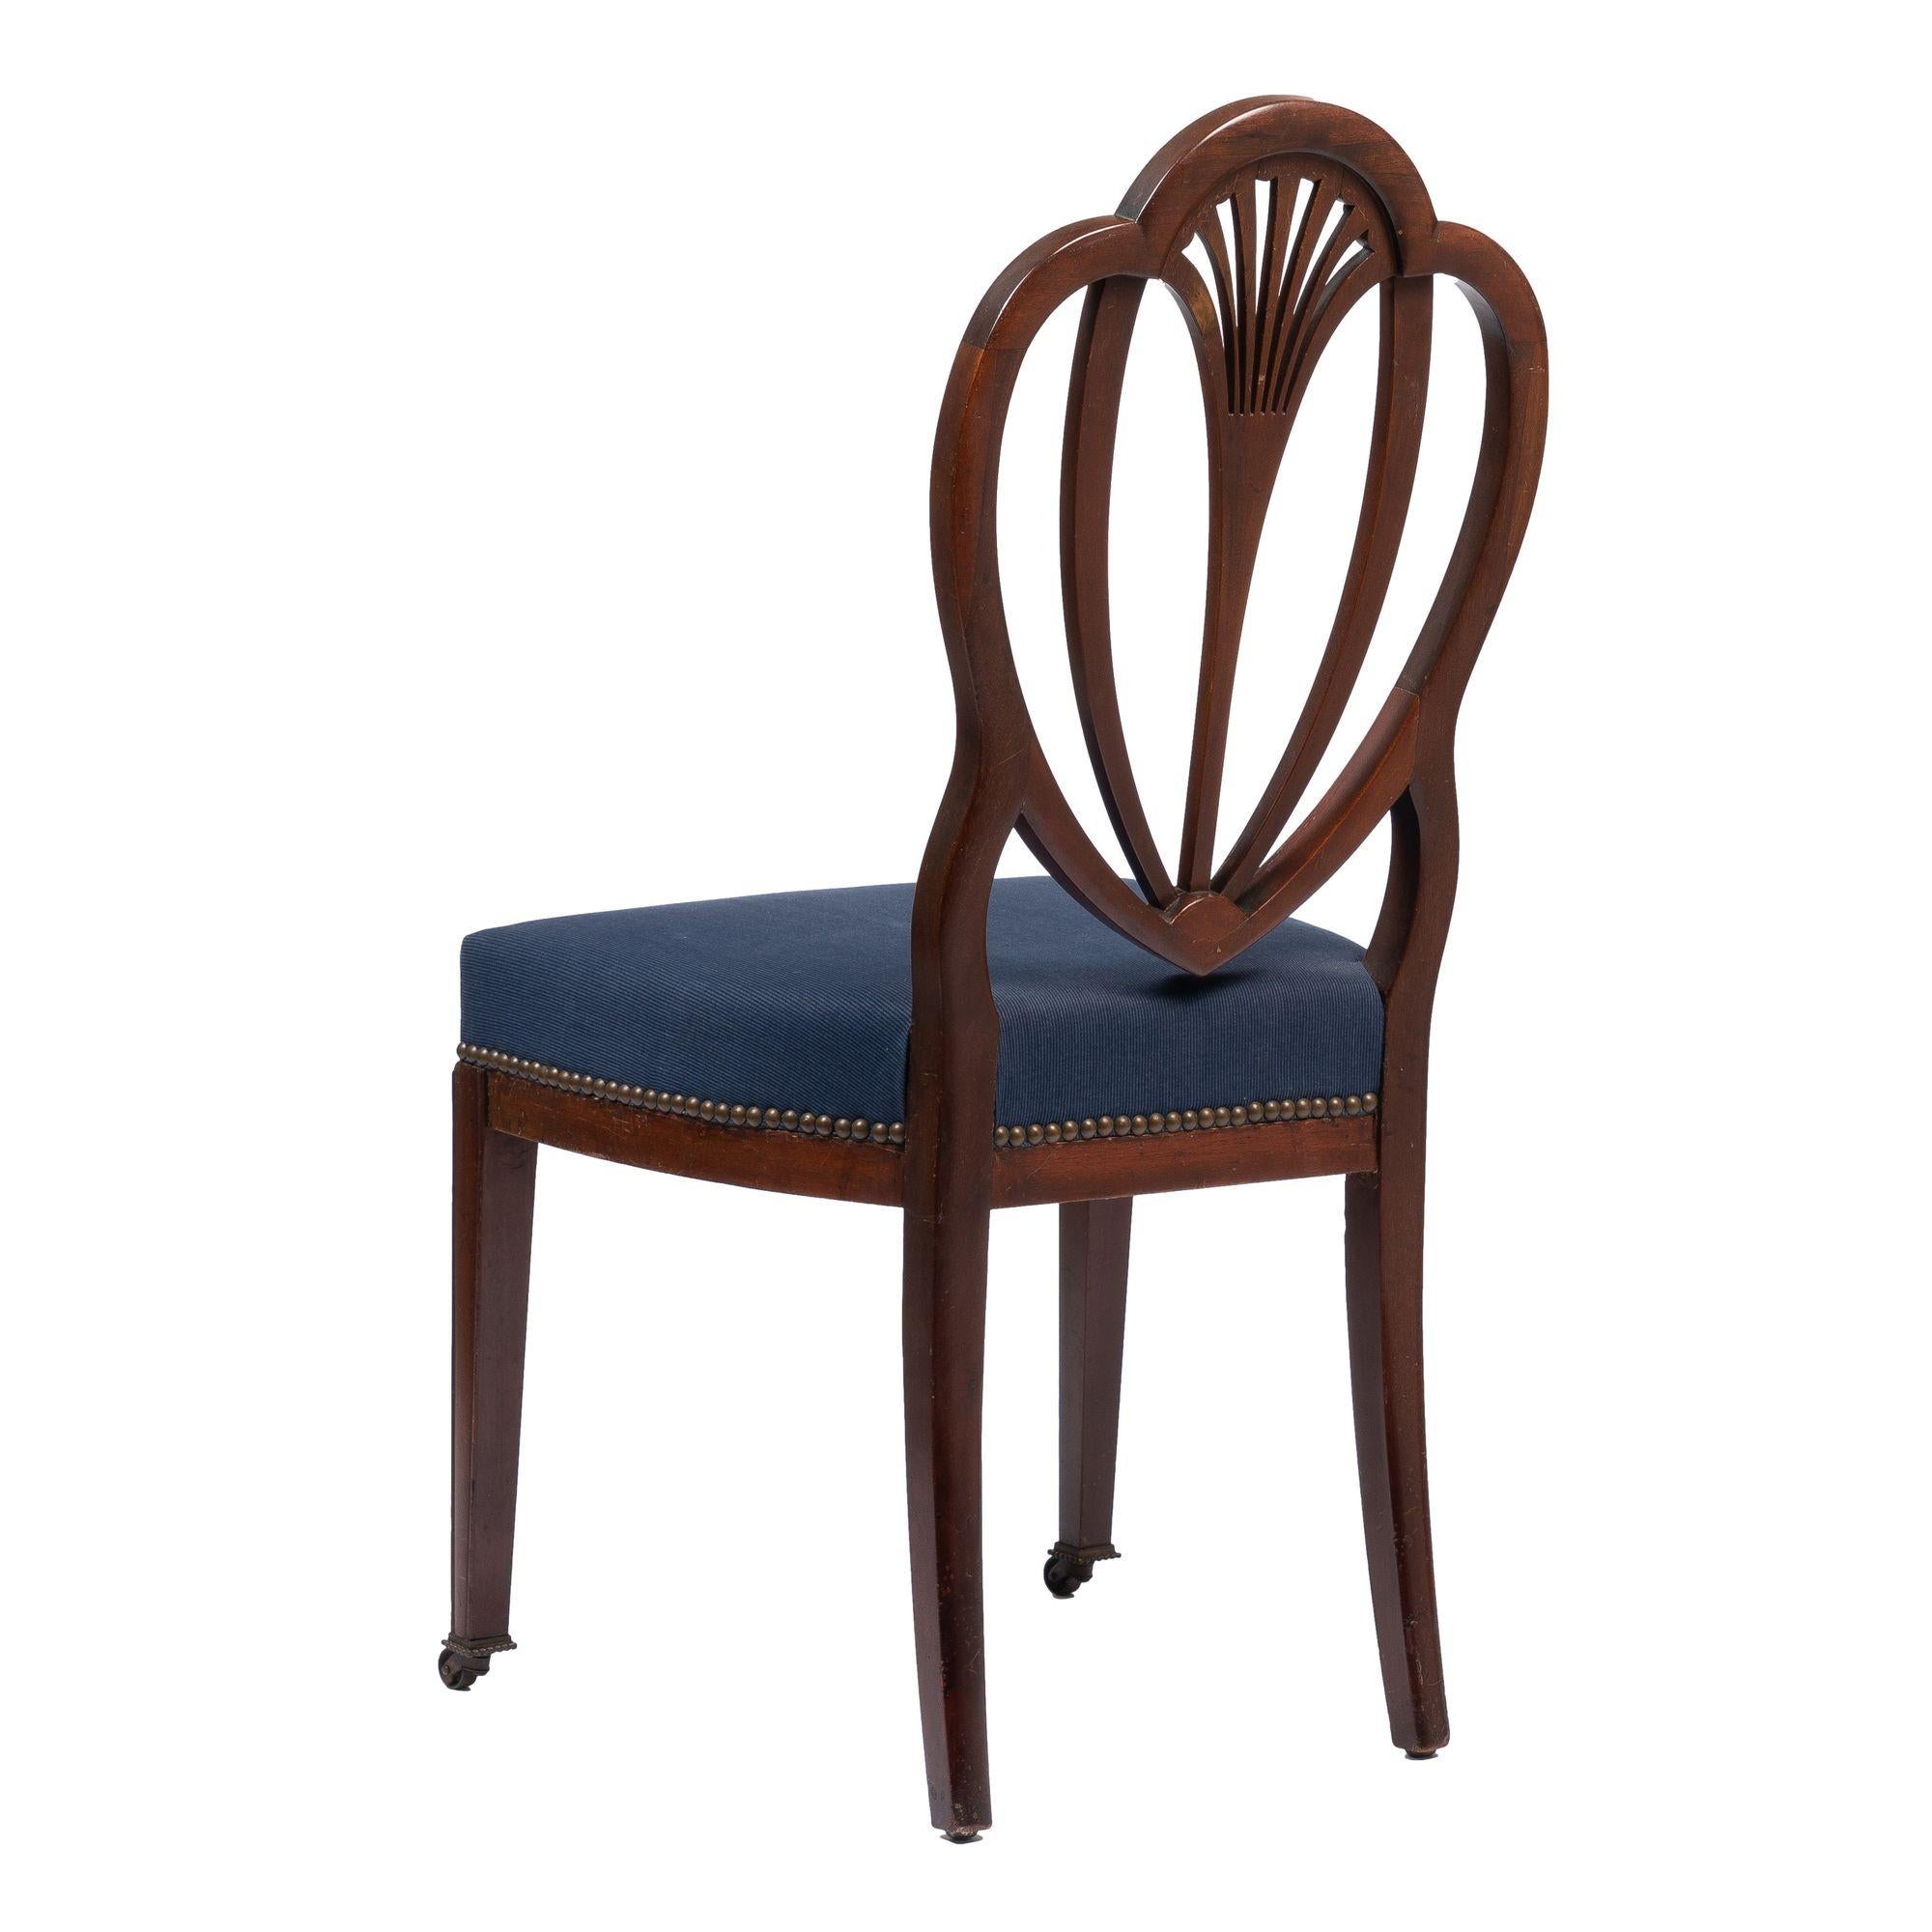 20th Century Pair of Academic Revival Federal Mahogany Heart Back Side Chairs, 1900-25 For Sale